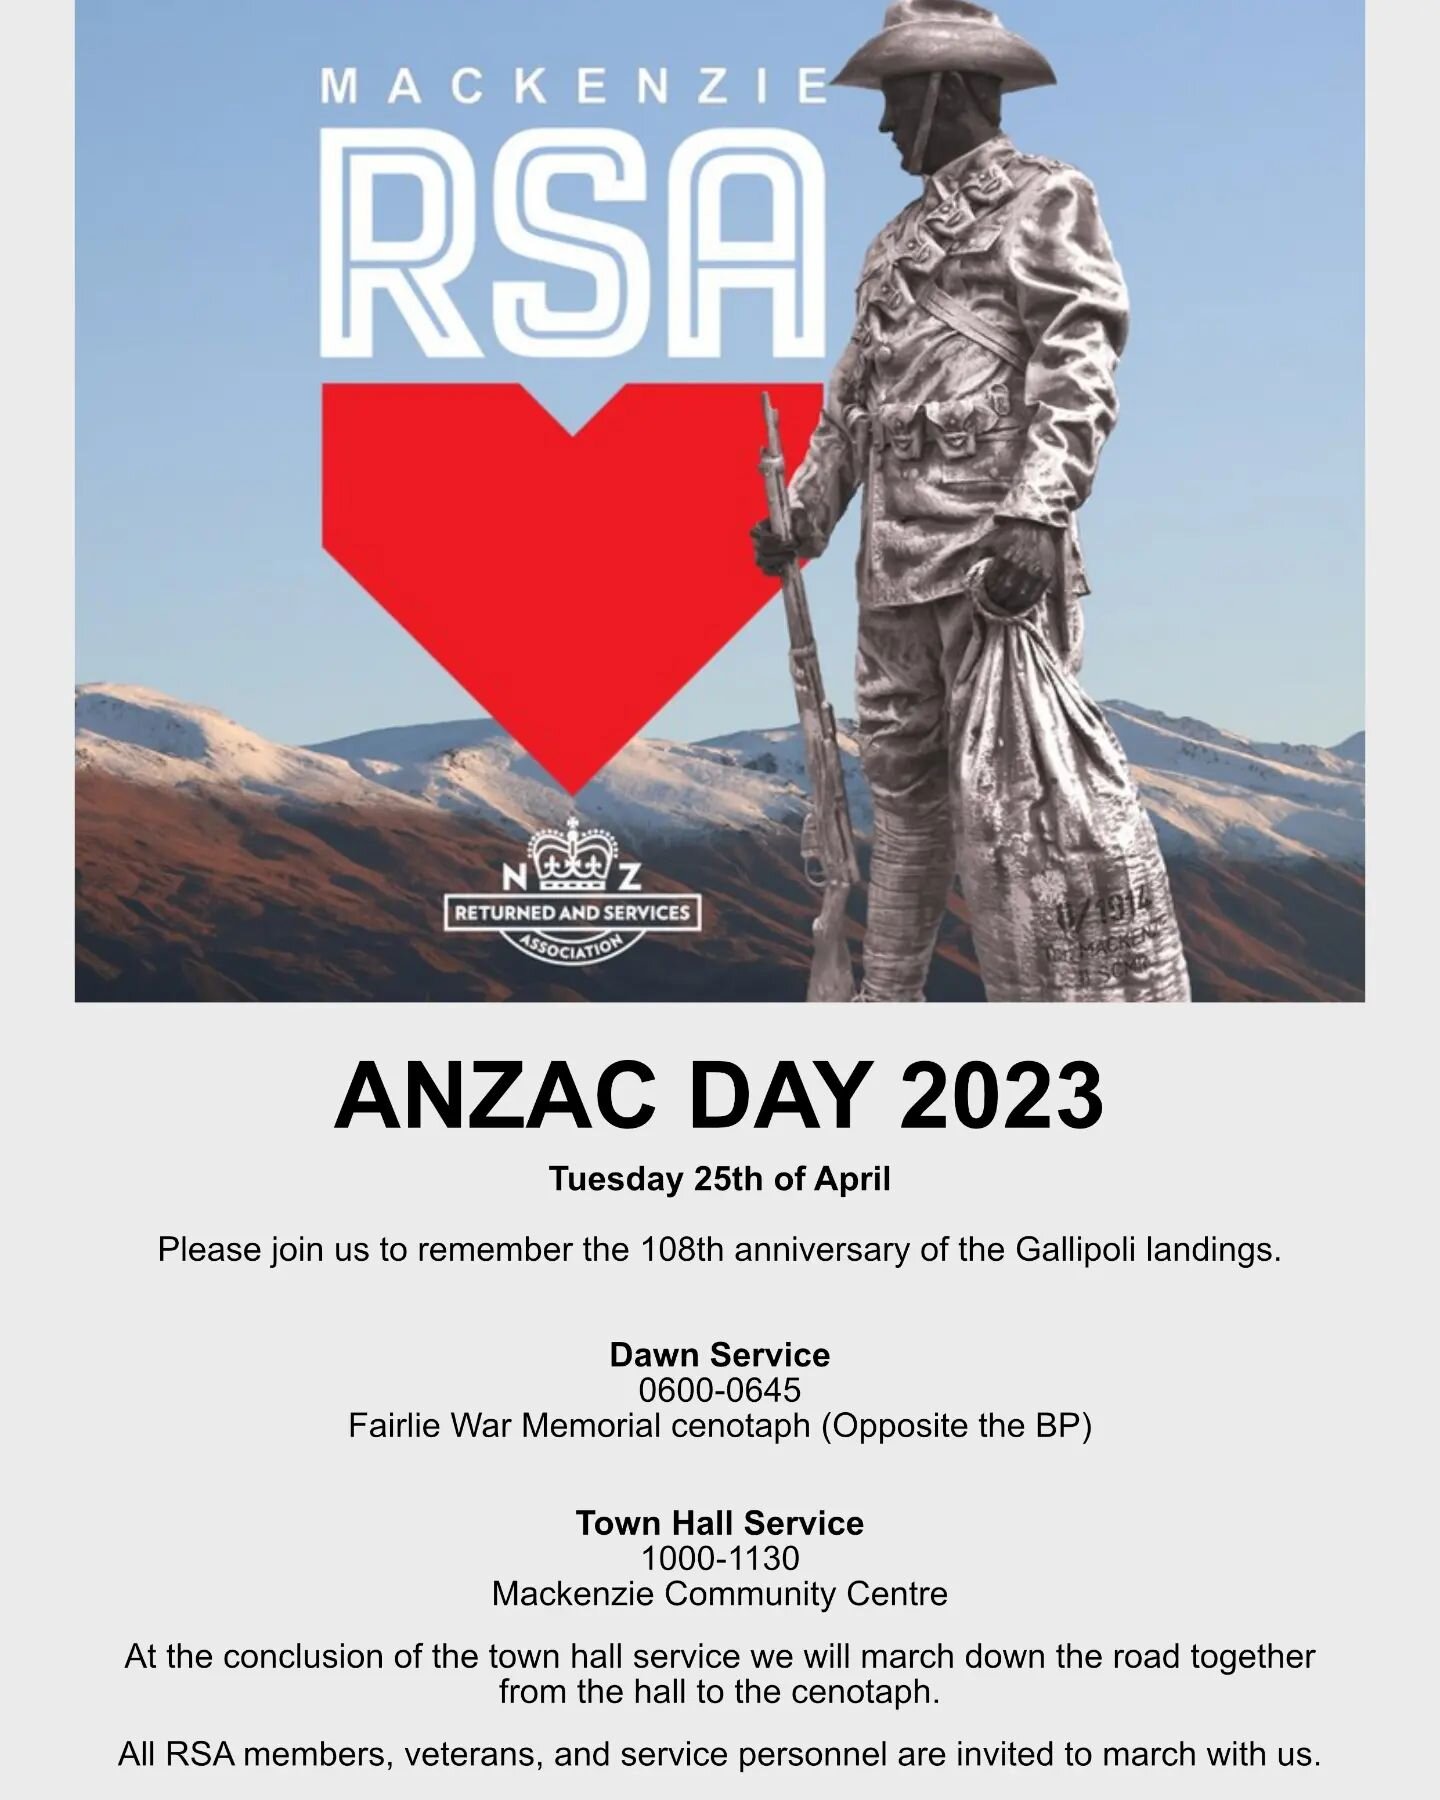 ANZAC Day 2023 details.

More details available at:
www.mackenziersa.co.nz